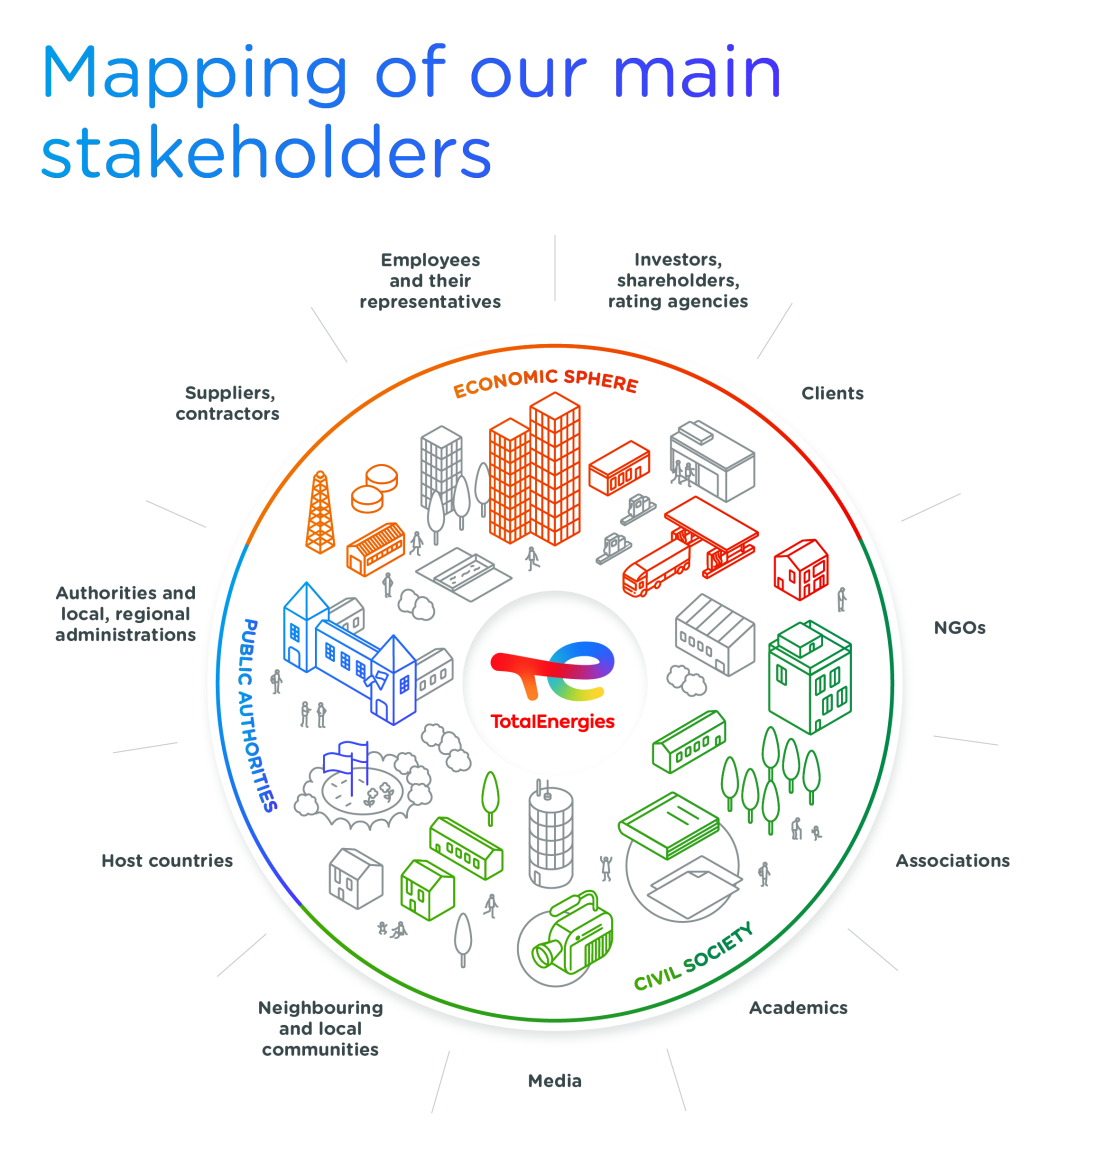 Mapping of our main stakeholders